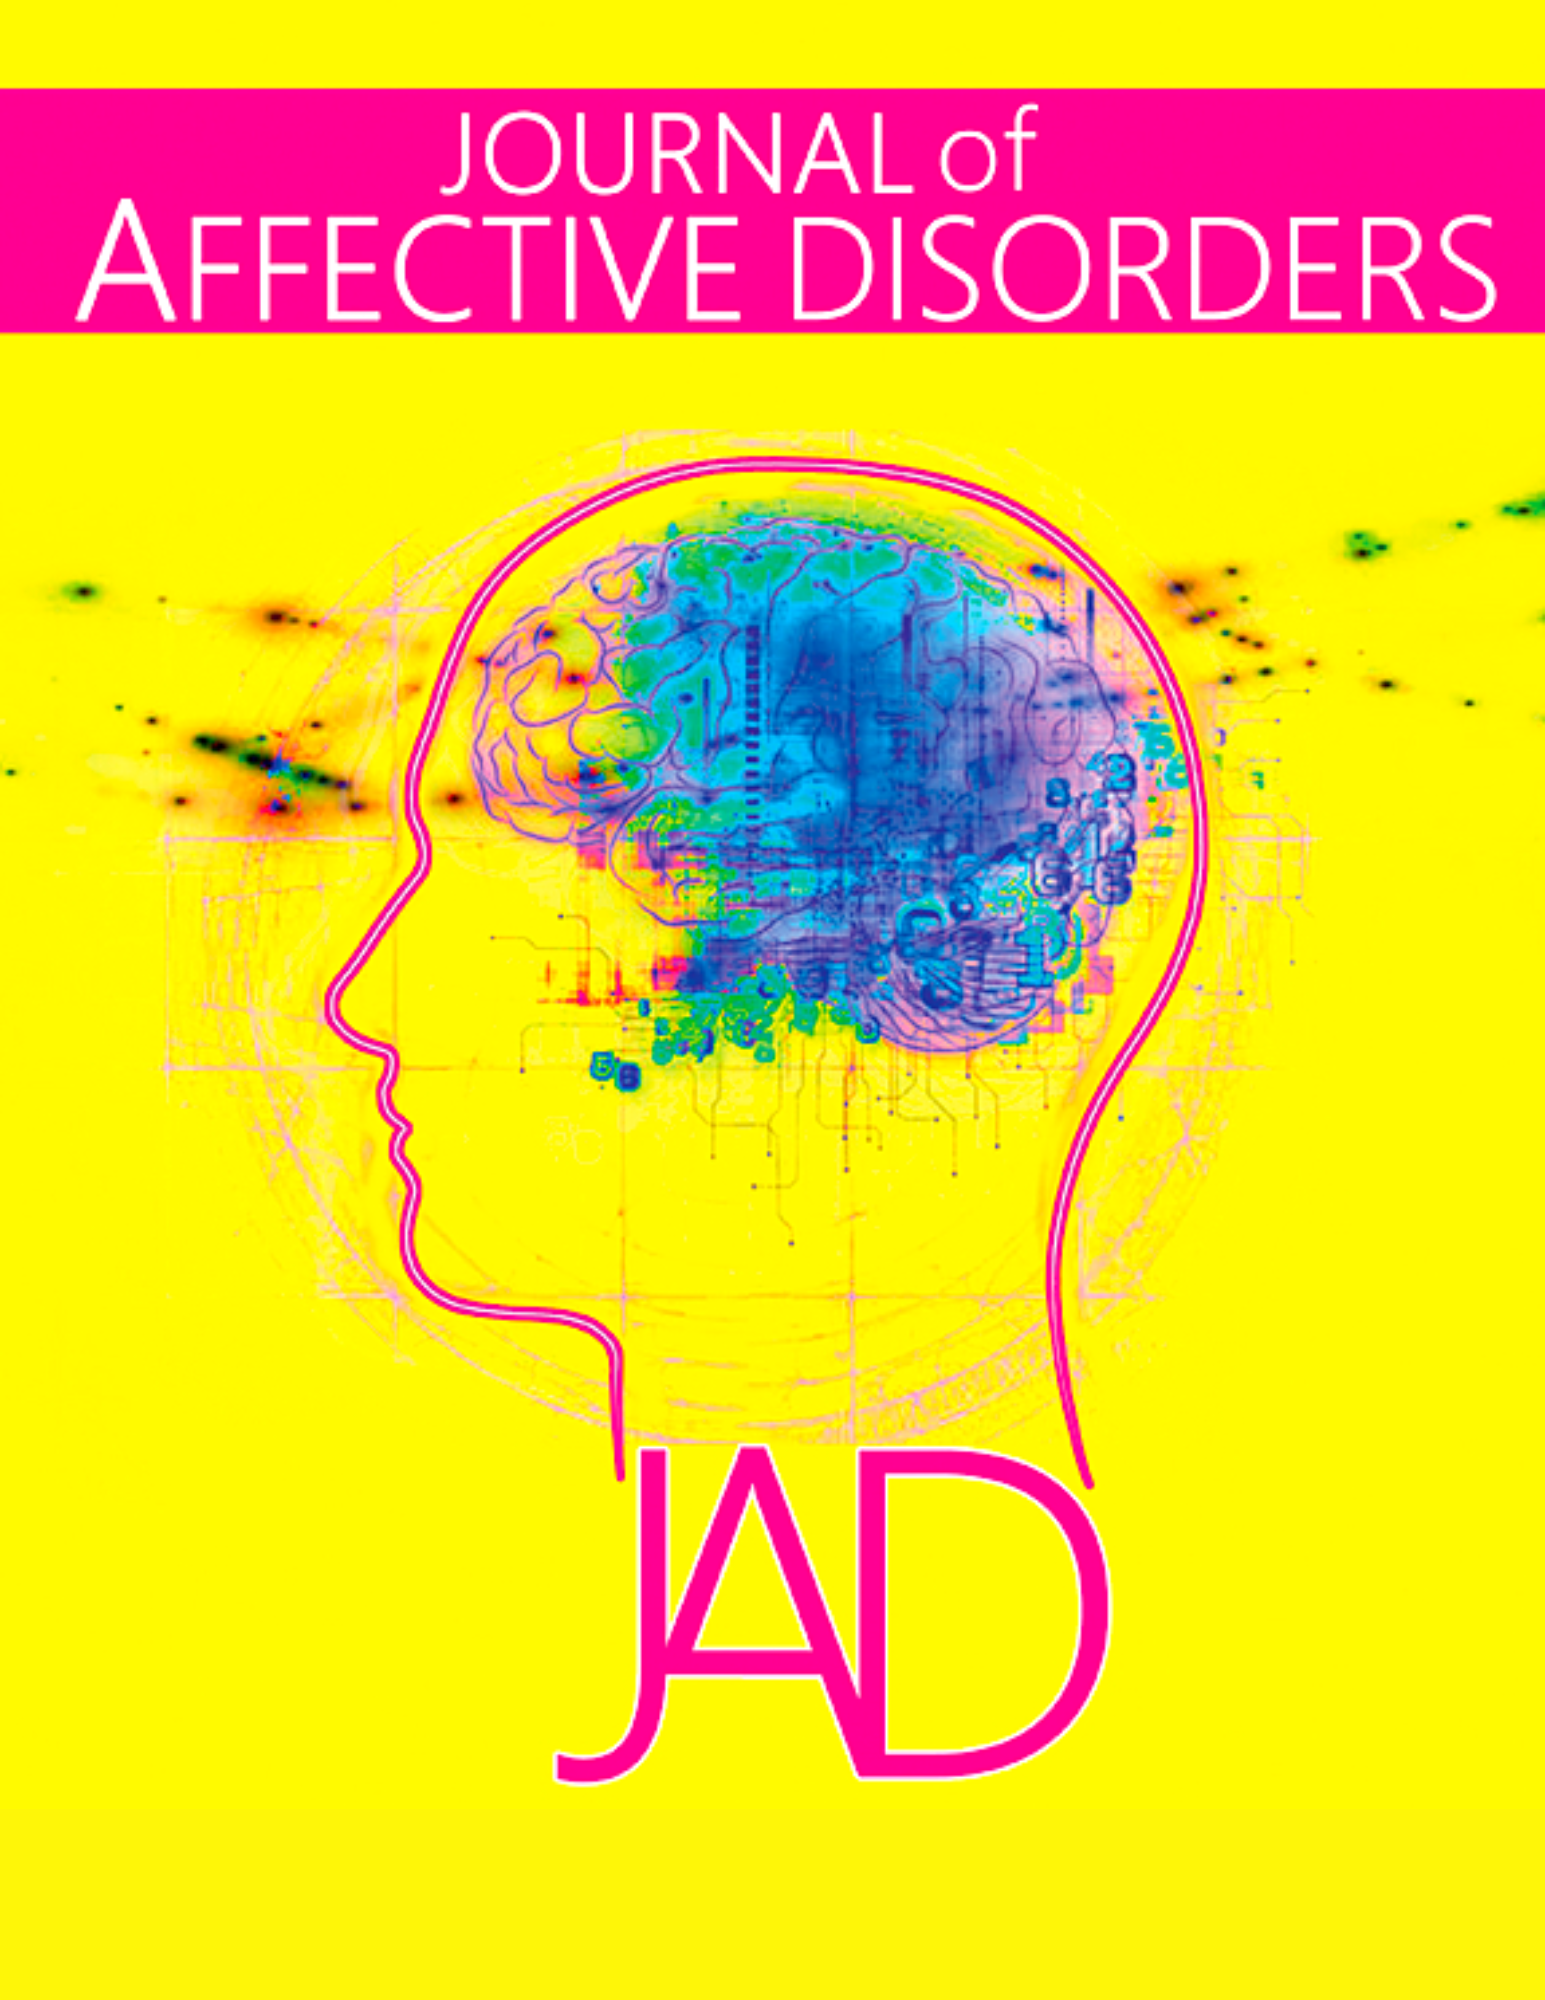 Journal of affective disorders